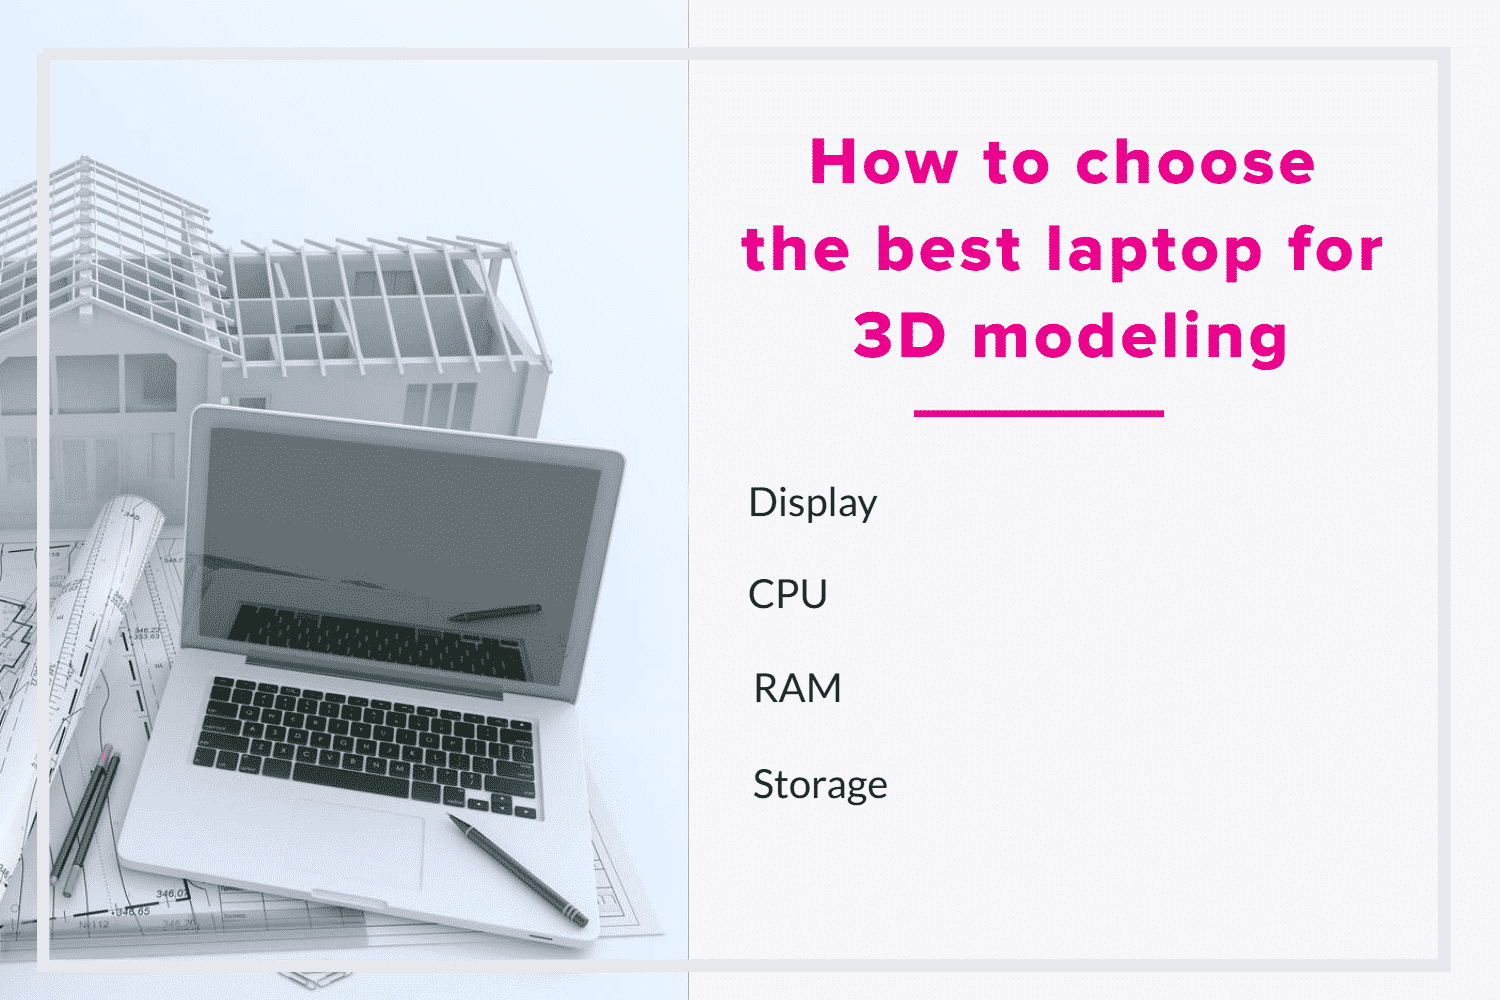 How to choose the best laptop for 3D modeling